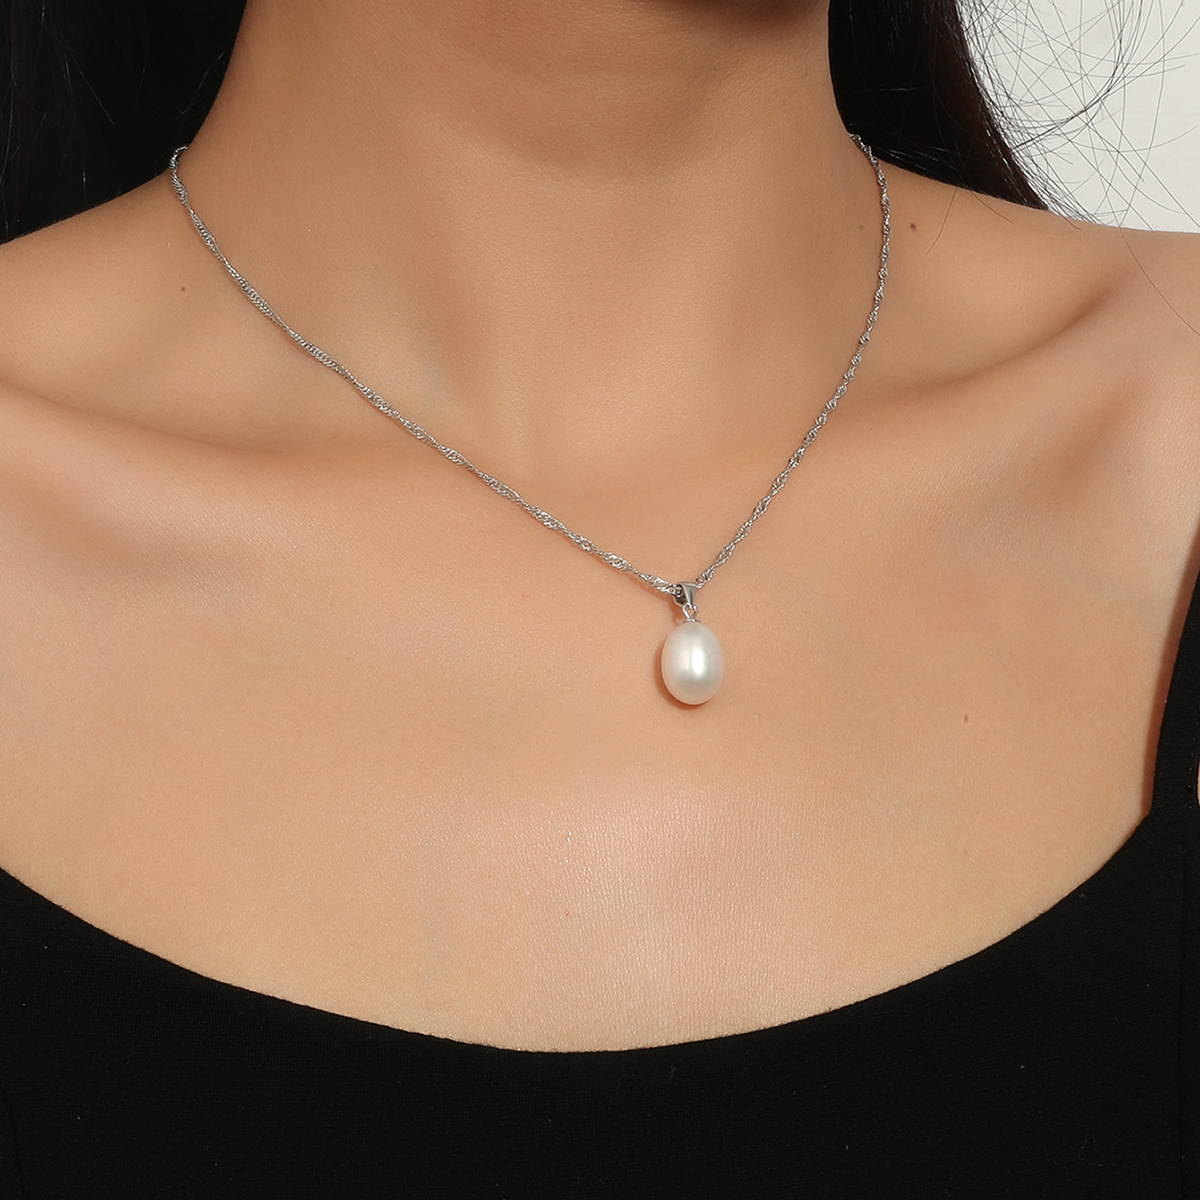 15pc_Silver Tone Necklace with Freshwater Pearl Pendant - White_UK Seller_GCJ221-White